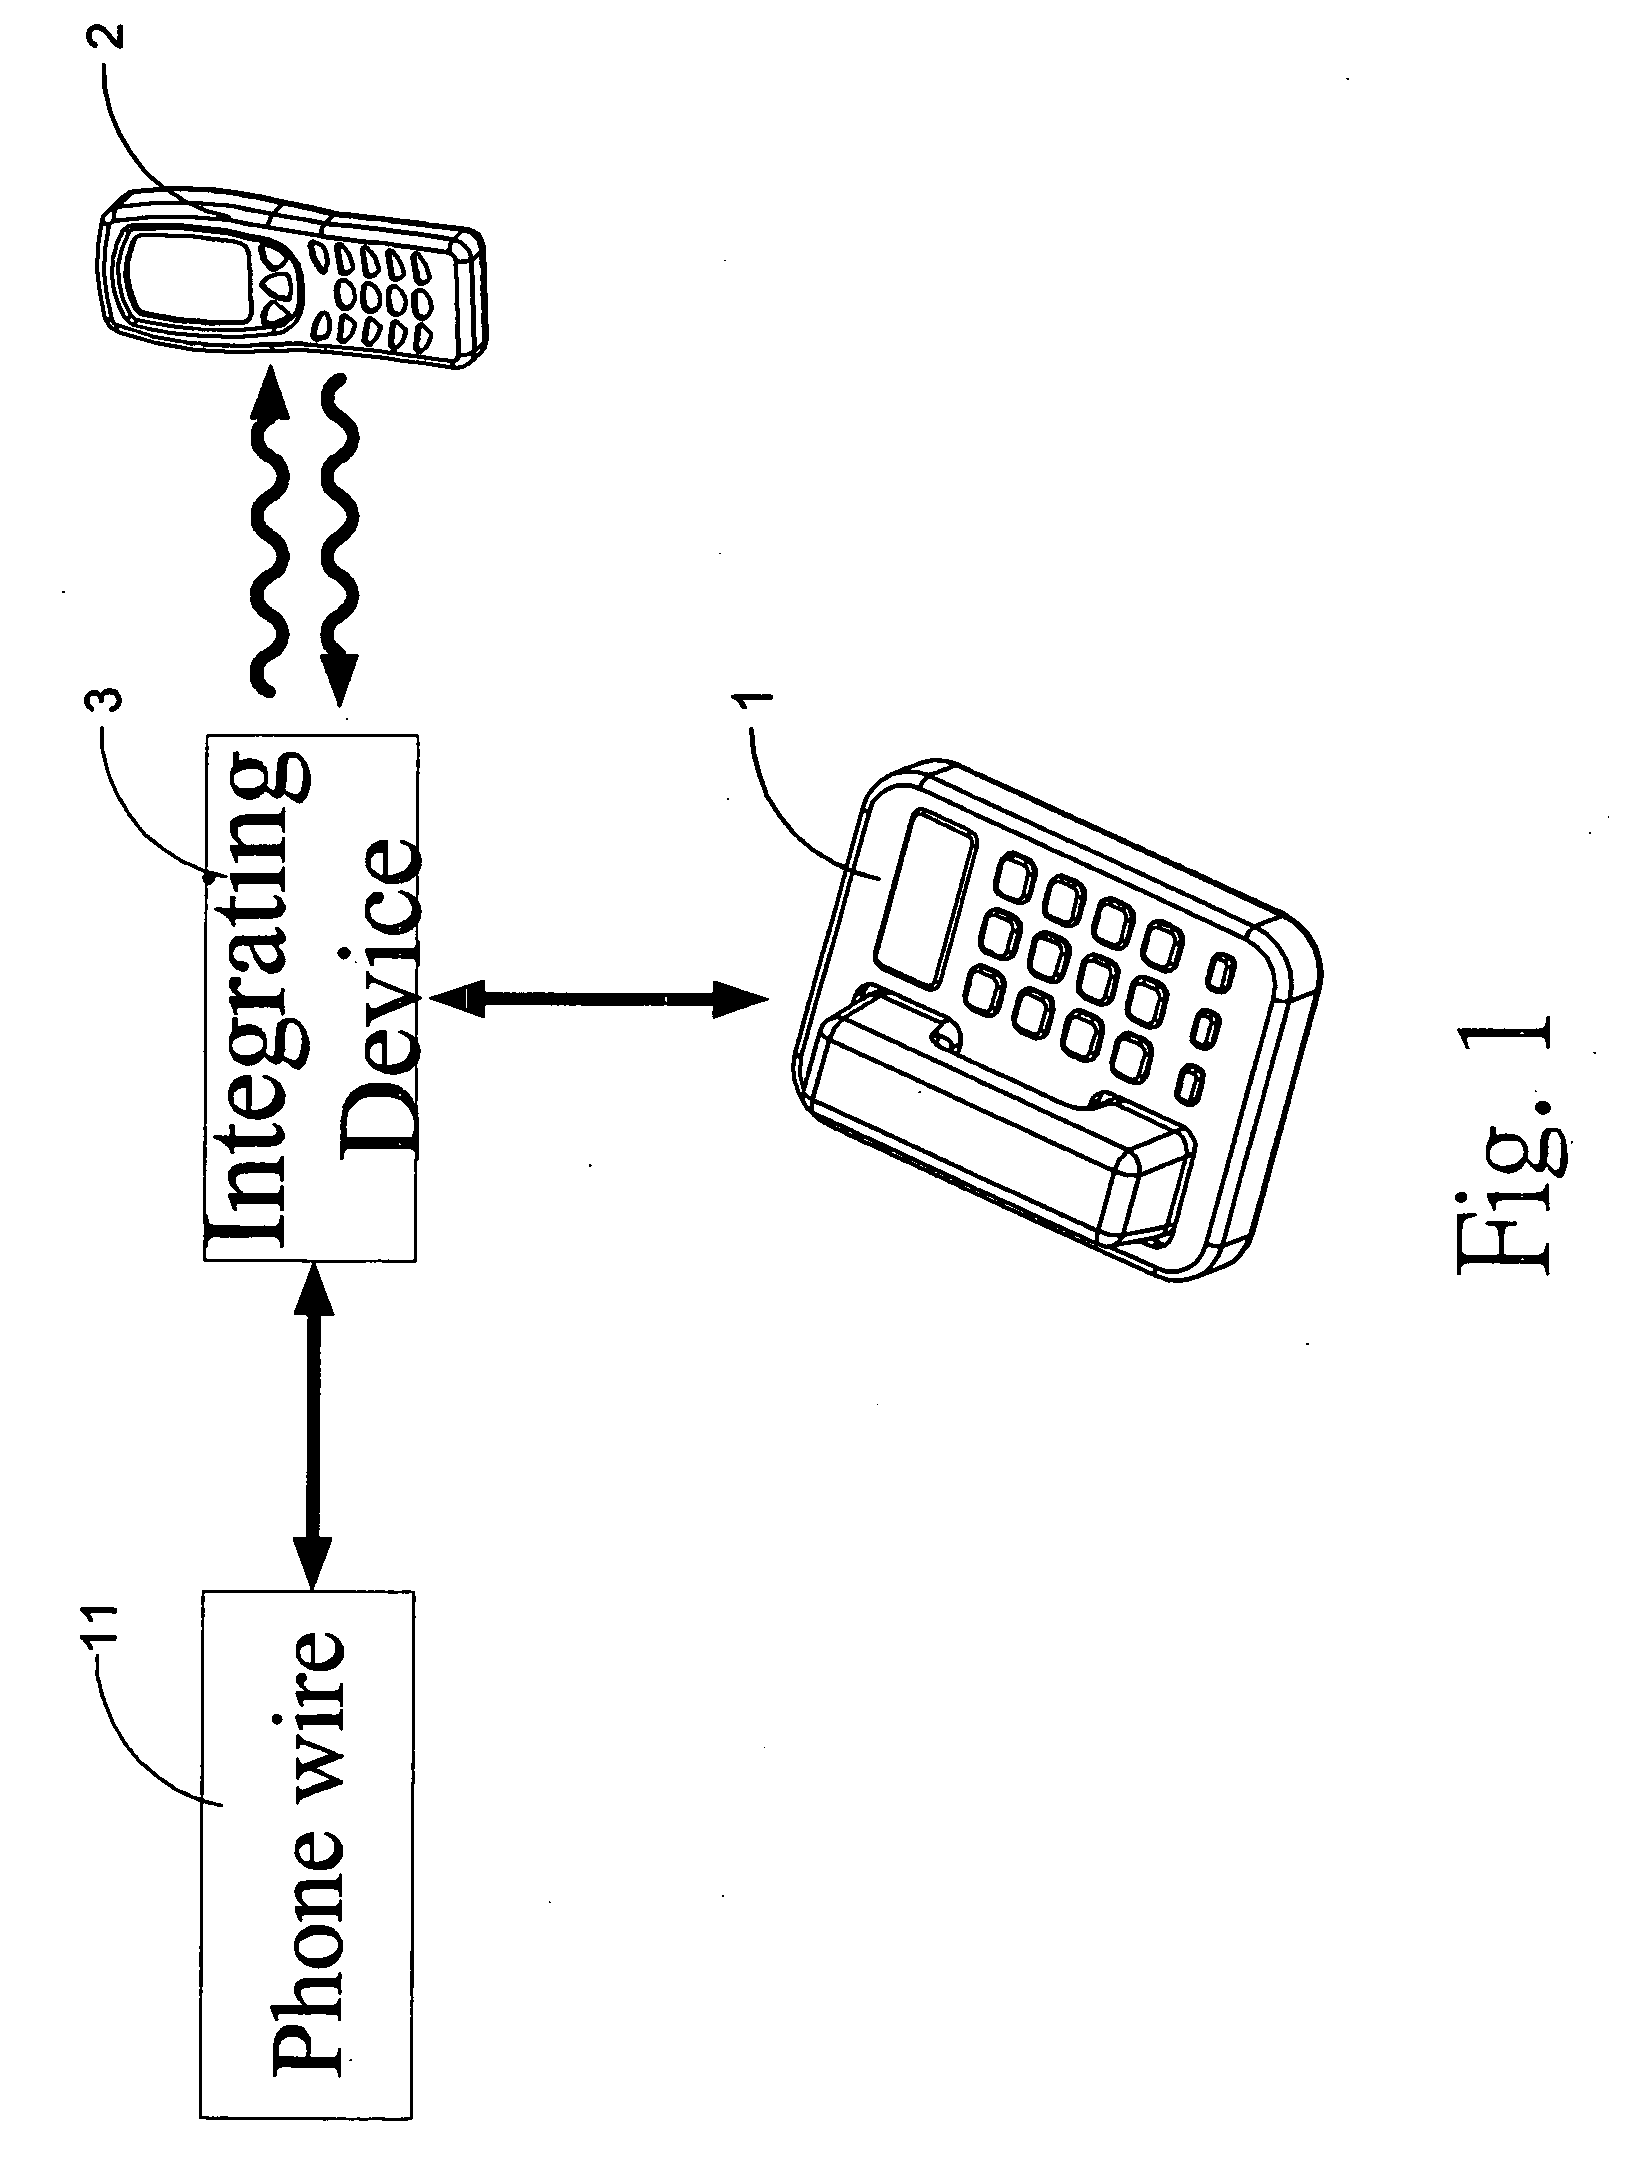 Communication device for connecting a blue tooth handset to an indoor phone